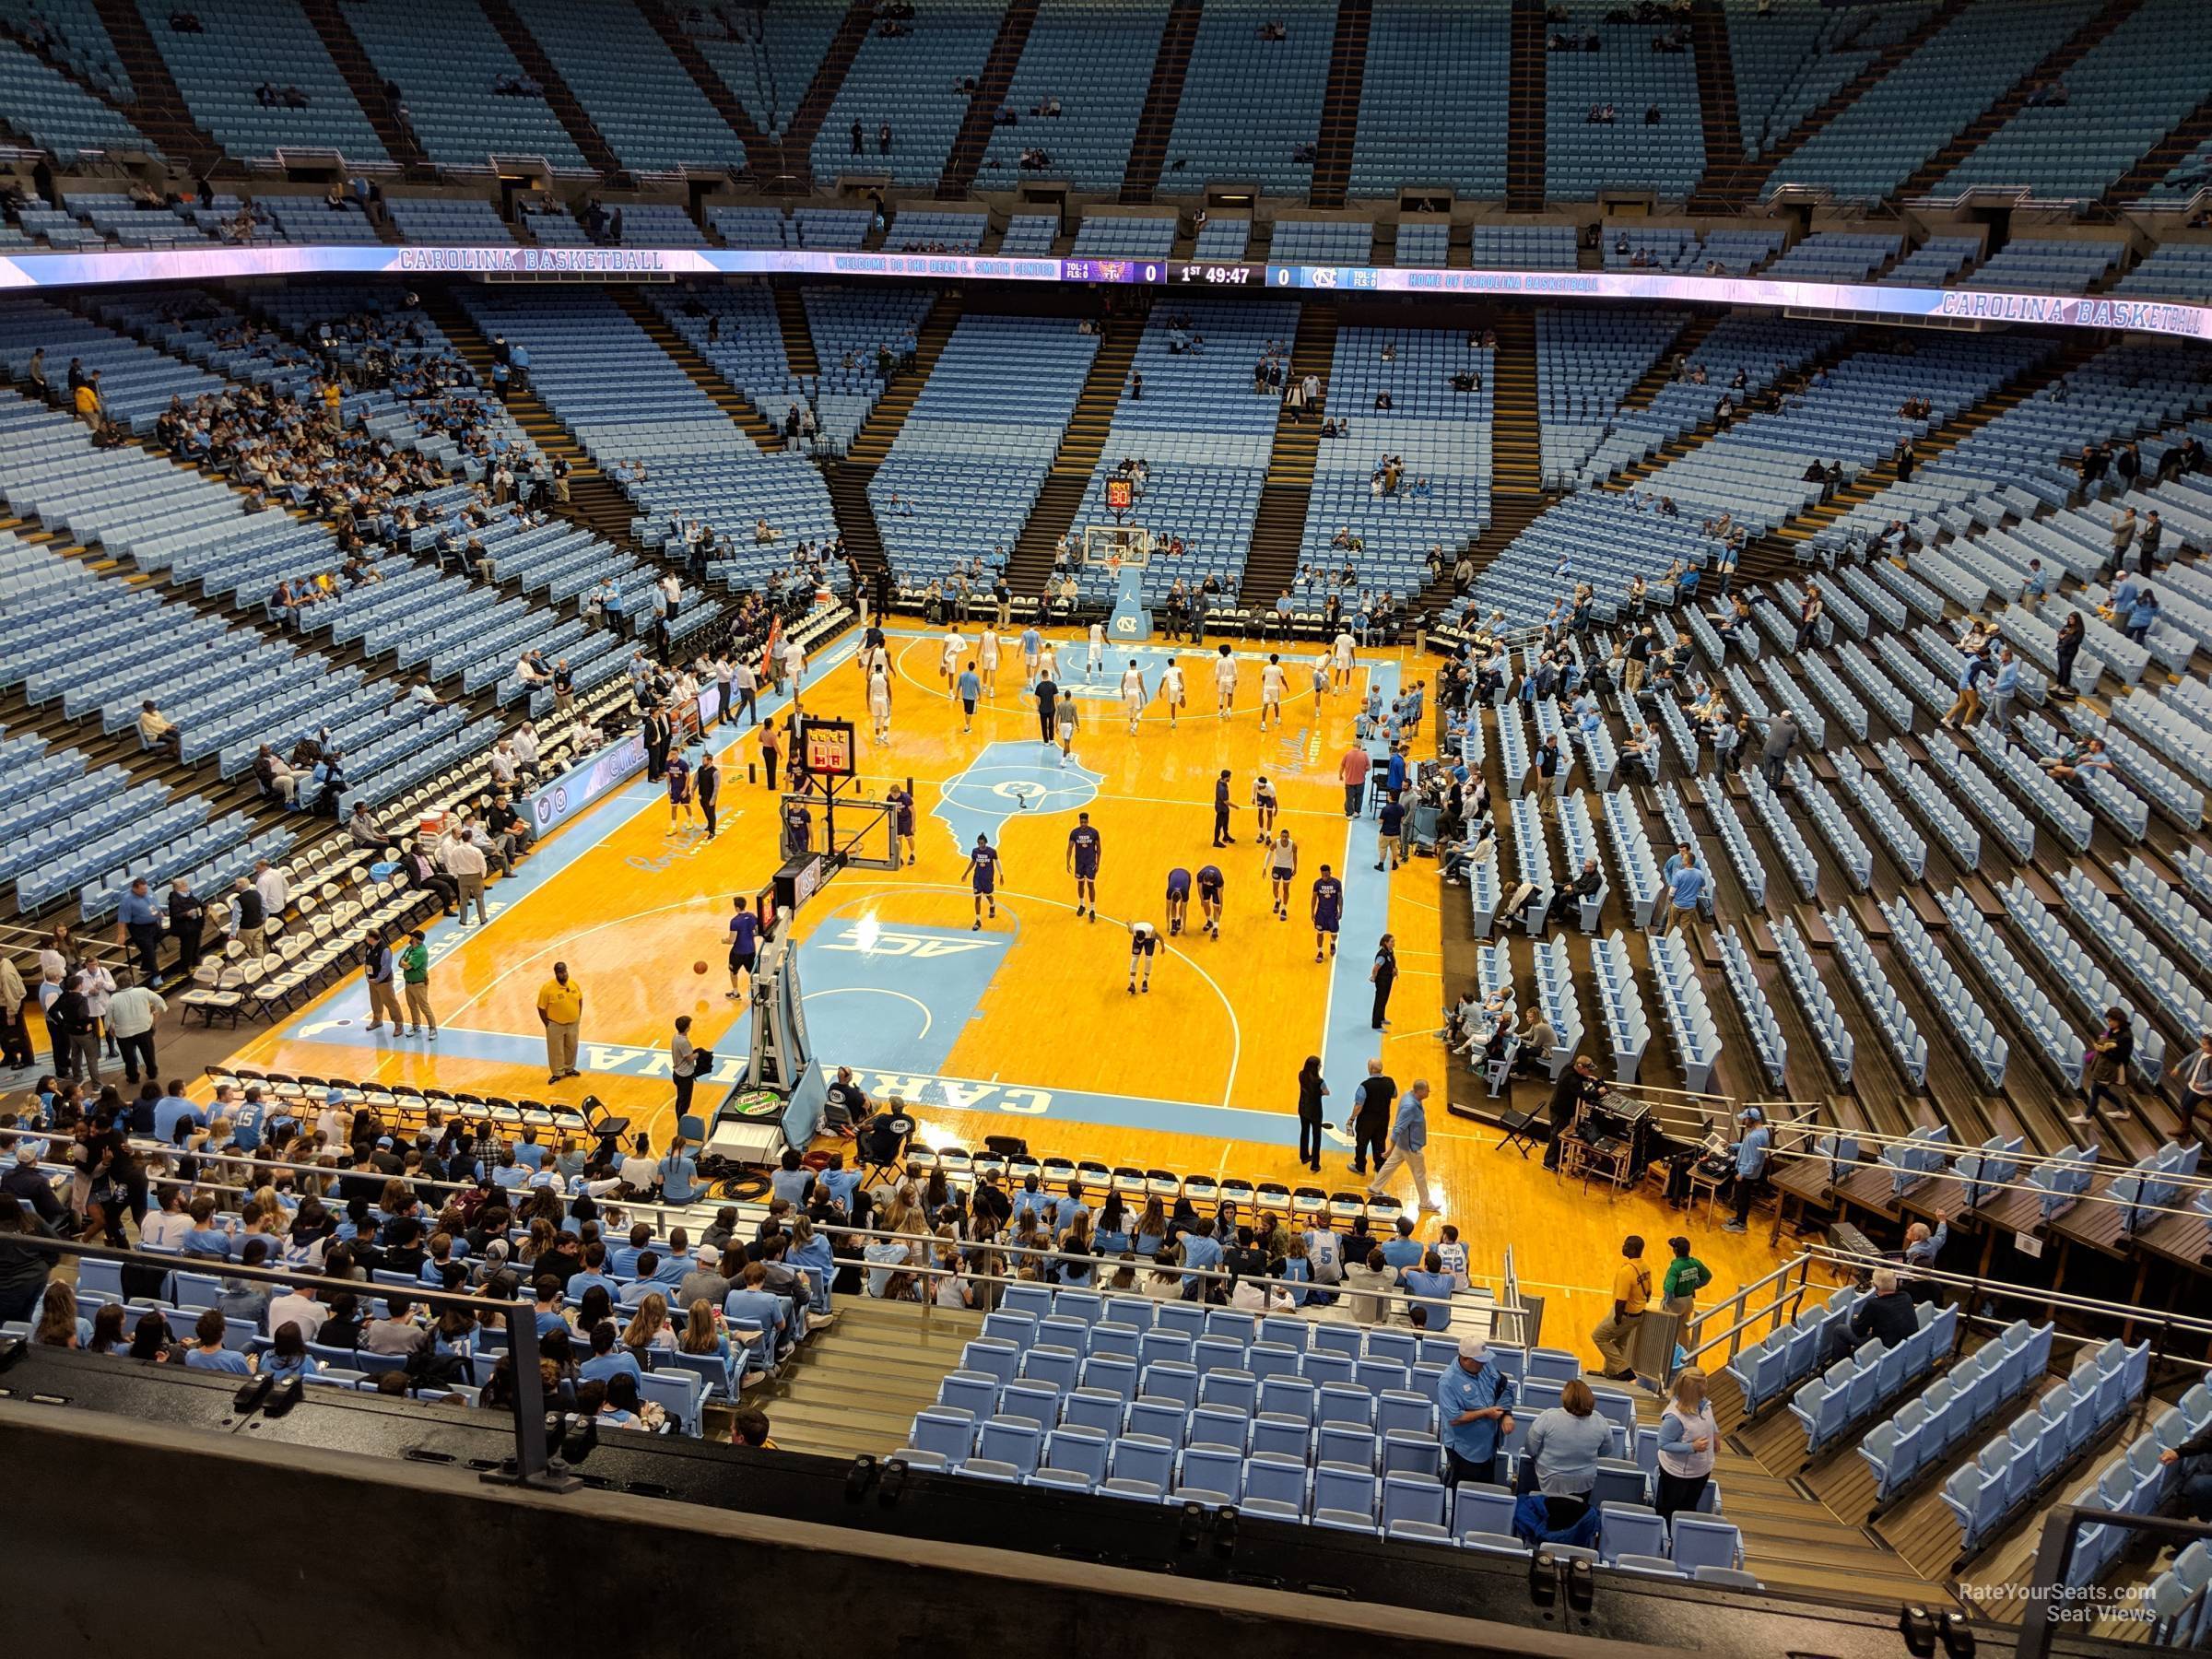 section 218, row c seat view  - dean smith center